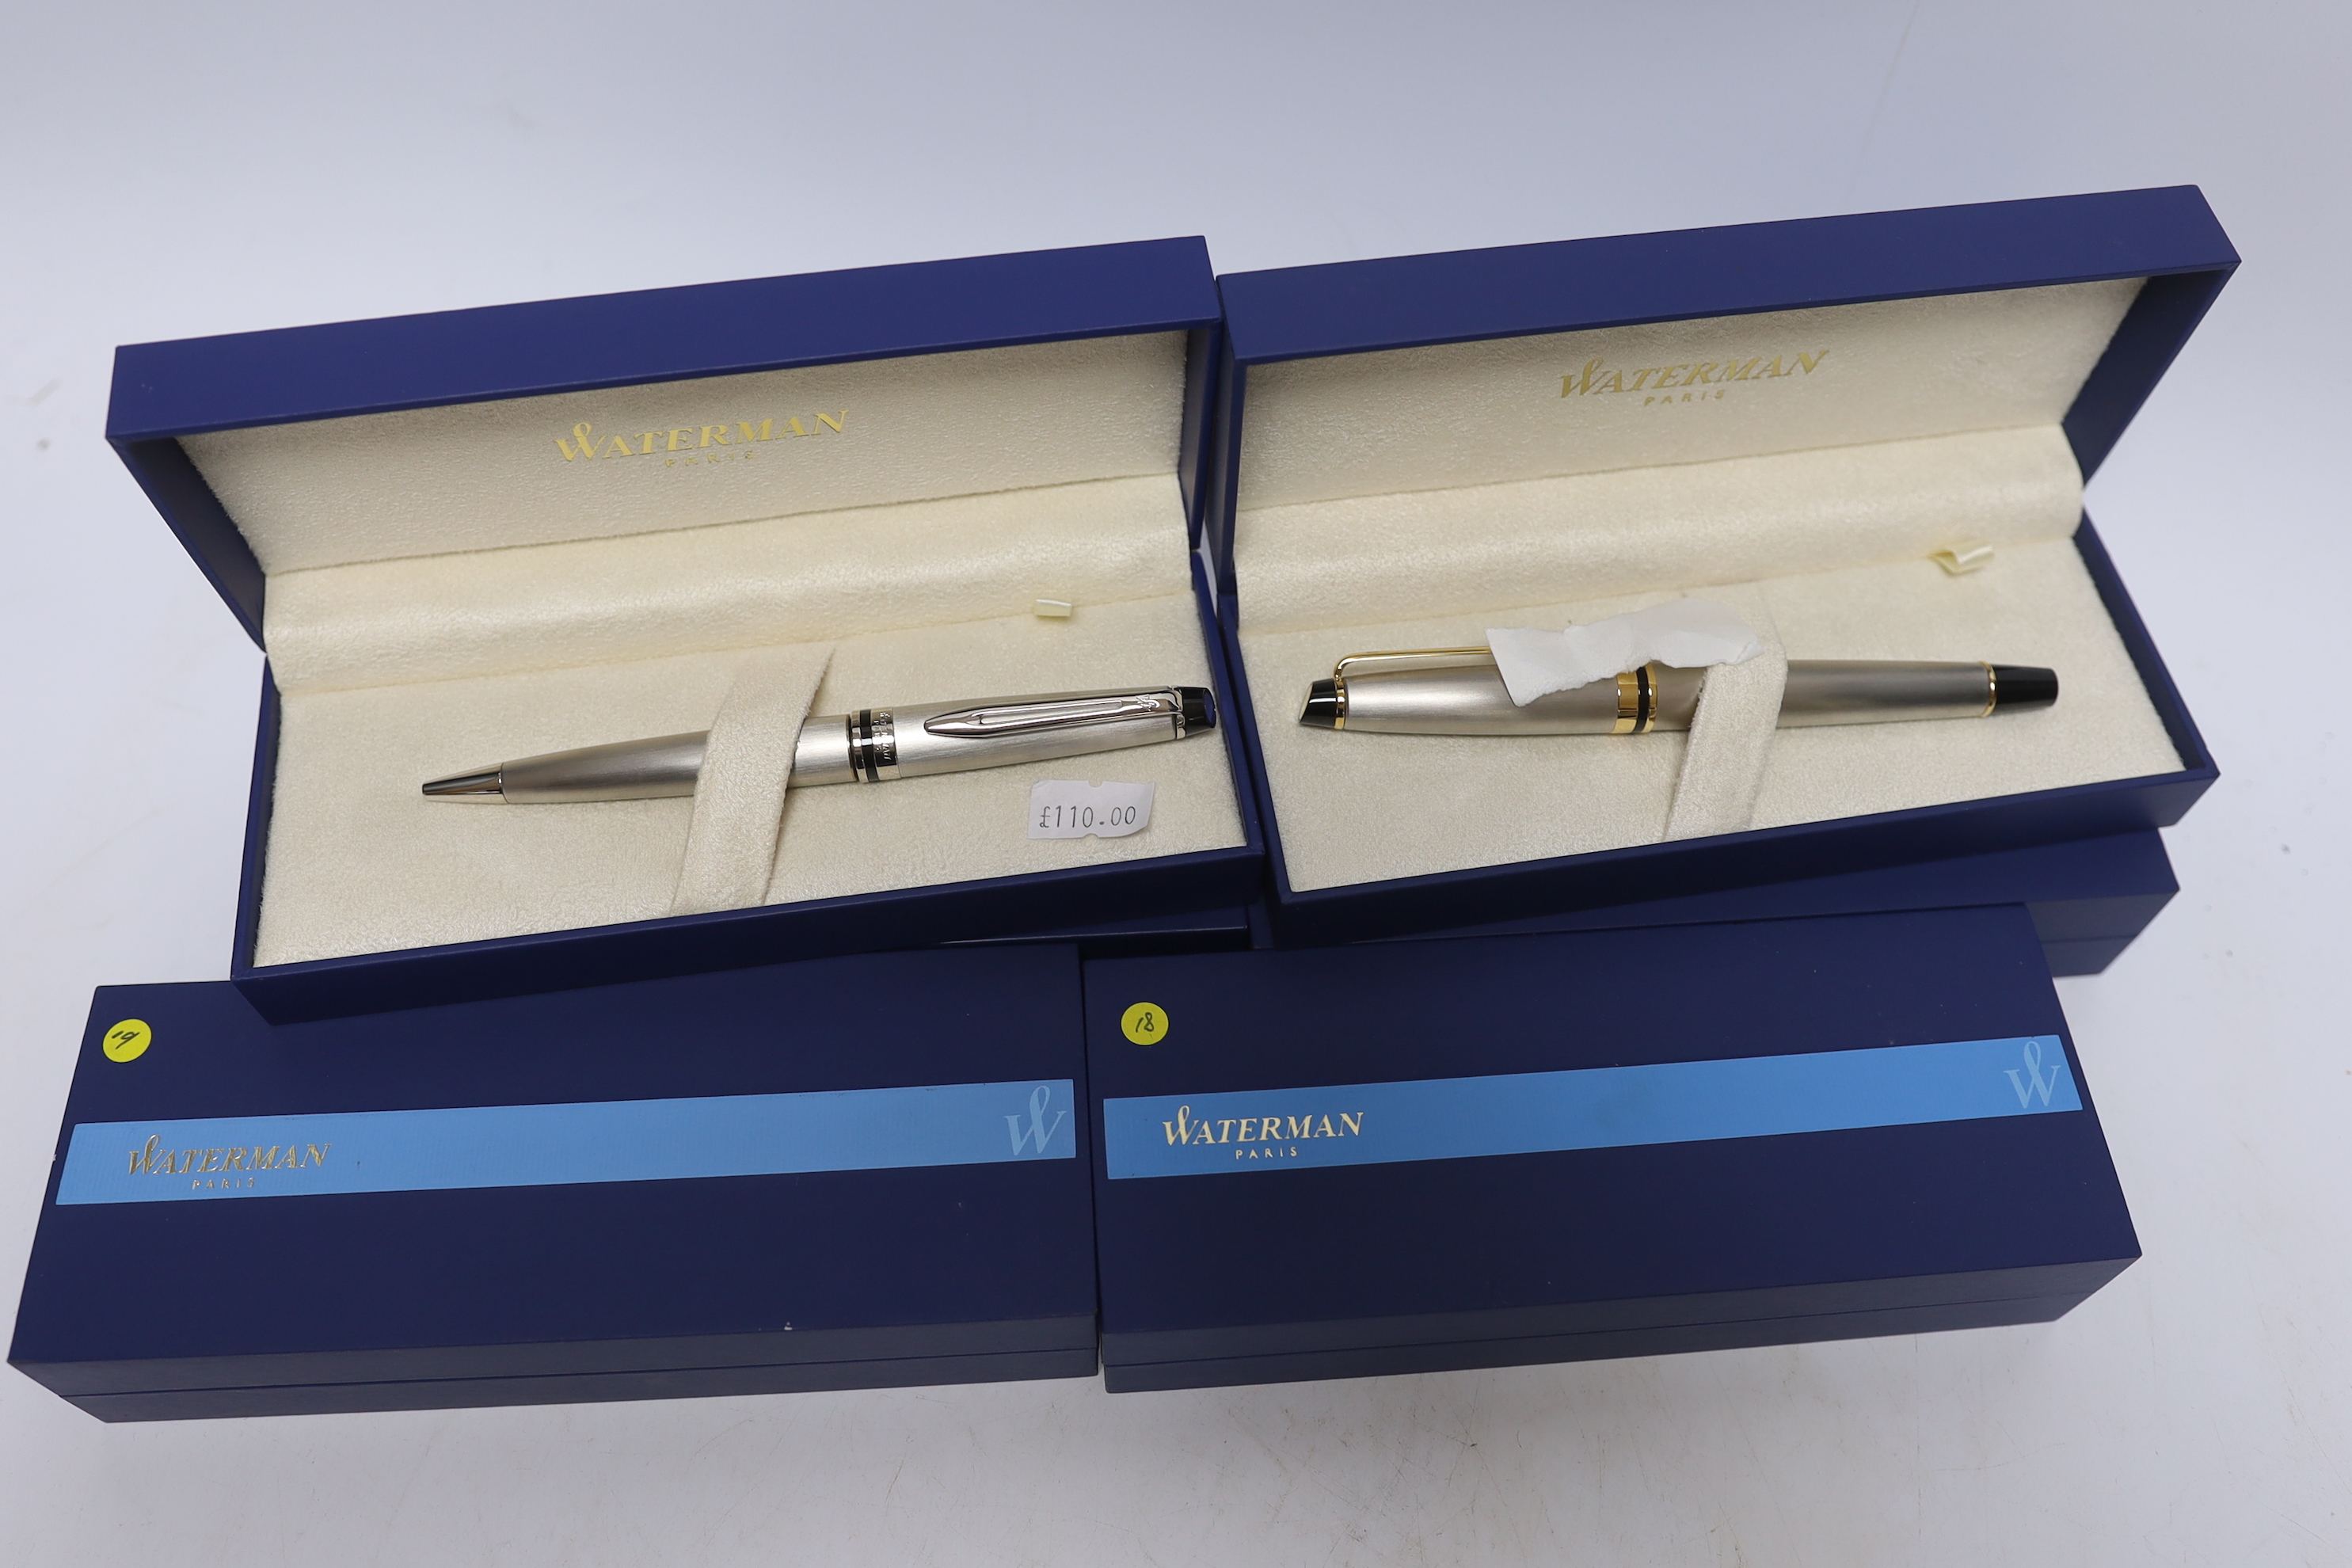 Six boxed Waterman pens; three Expert Rollerball pens, two Expert Ballpoint pens, and a Hemisphere Rollerball pen